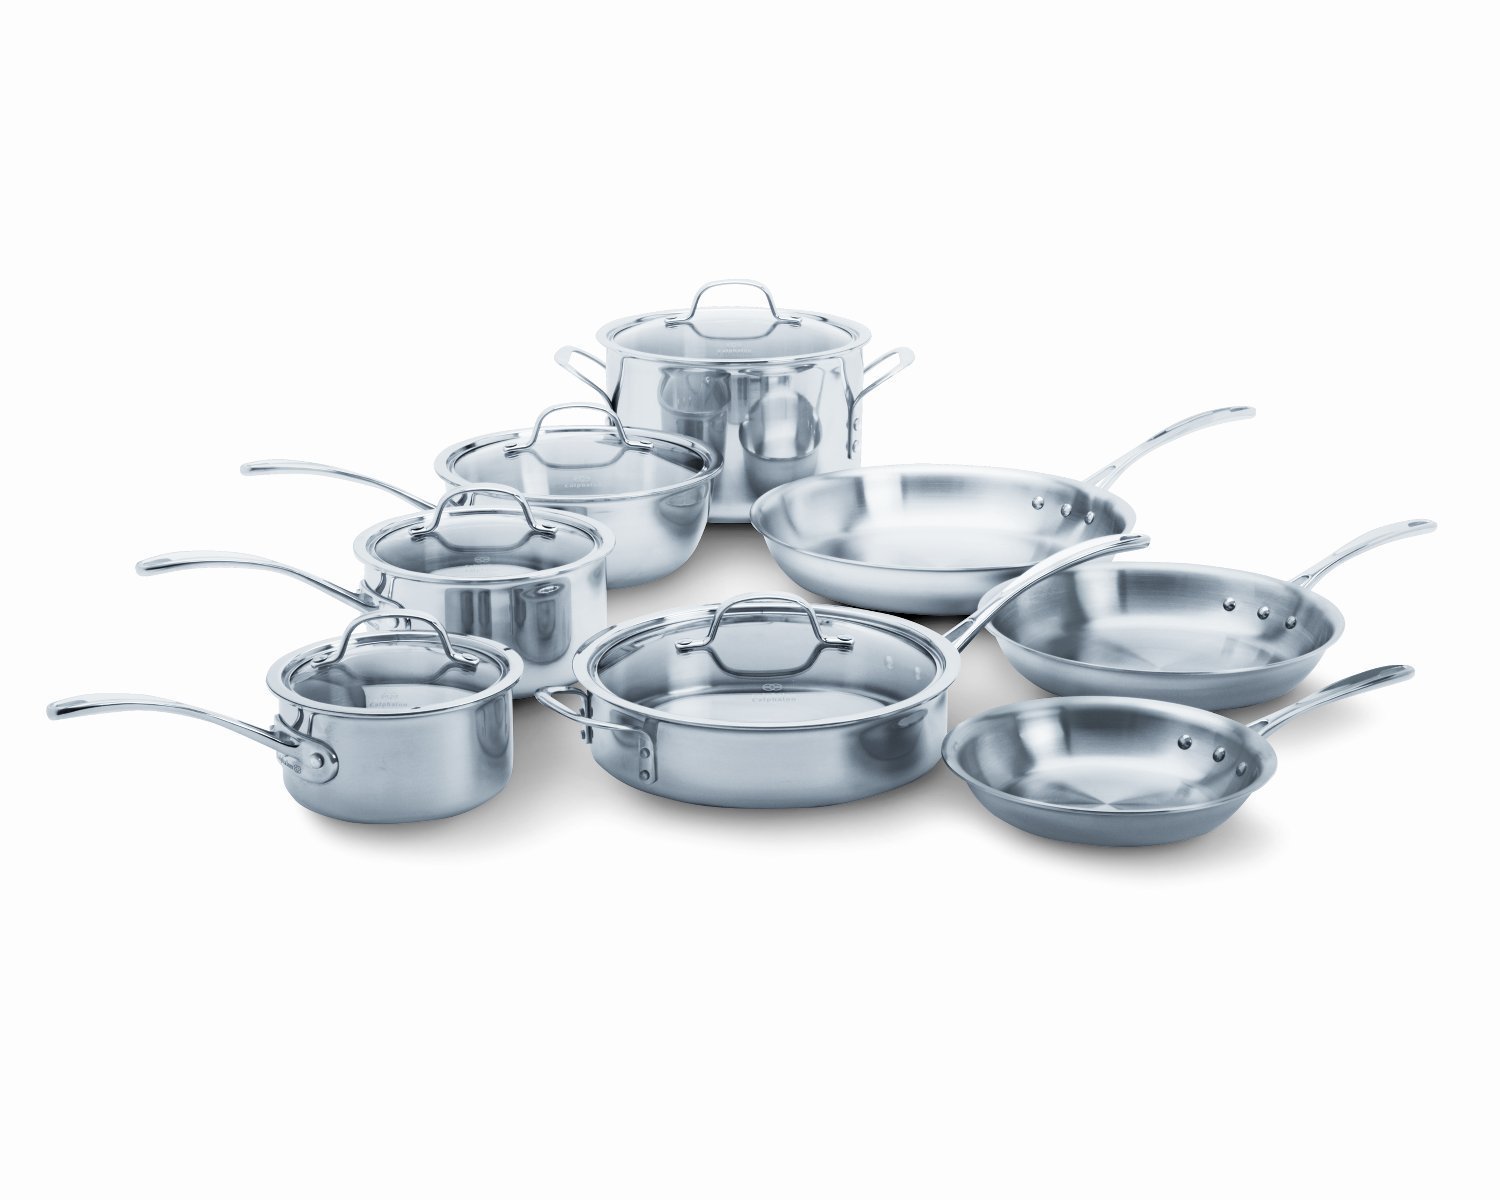 Review of Calphalon Tri-Ply Stainless Steel 13-Piece Cookware Set